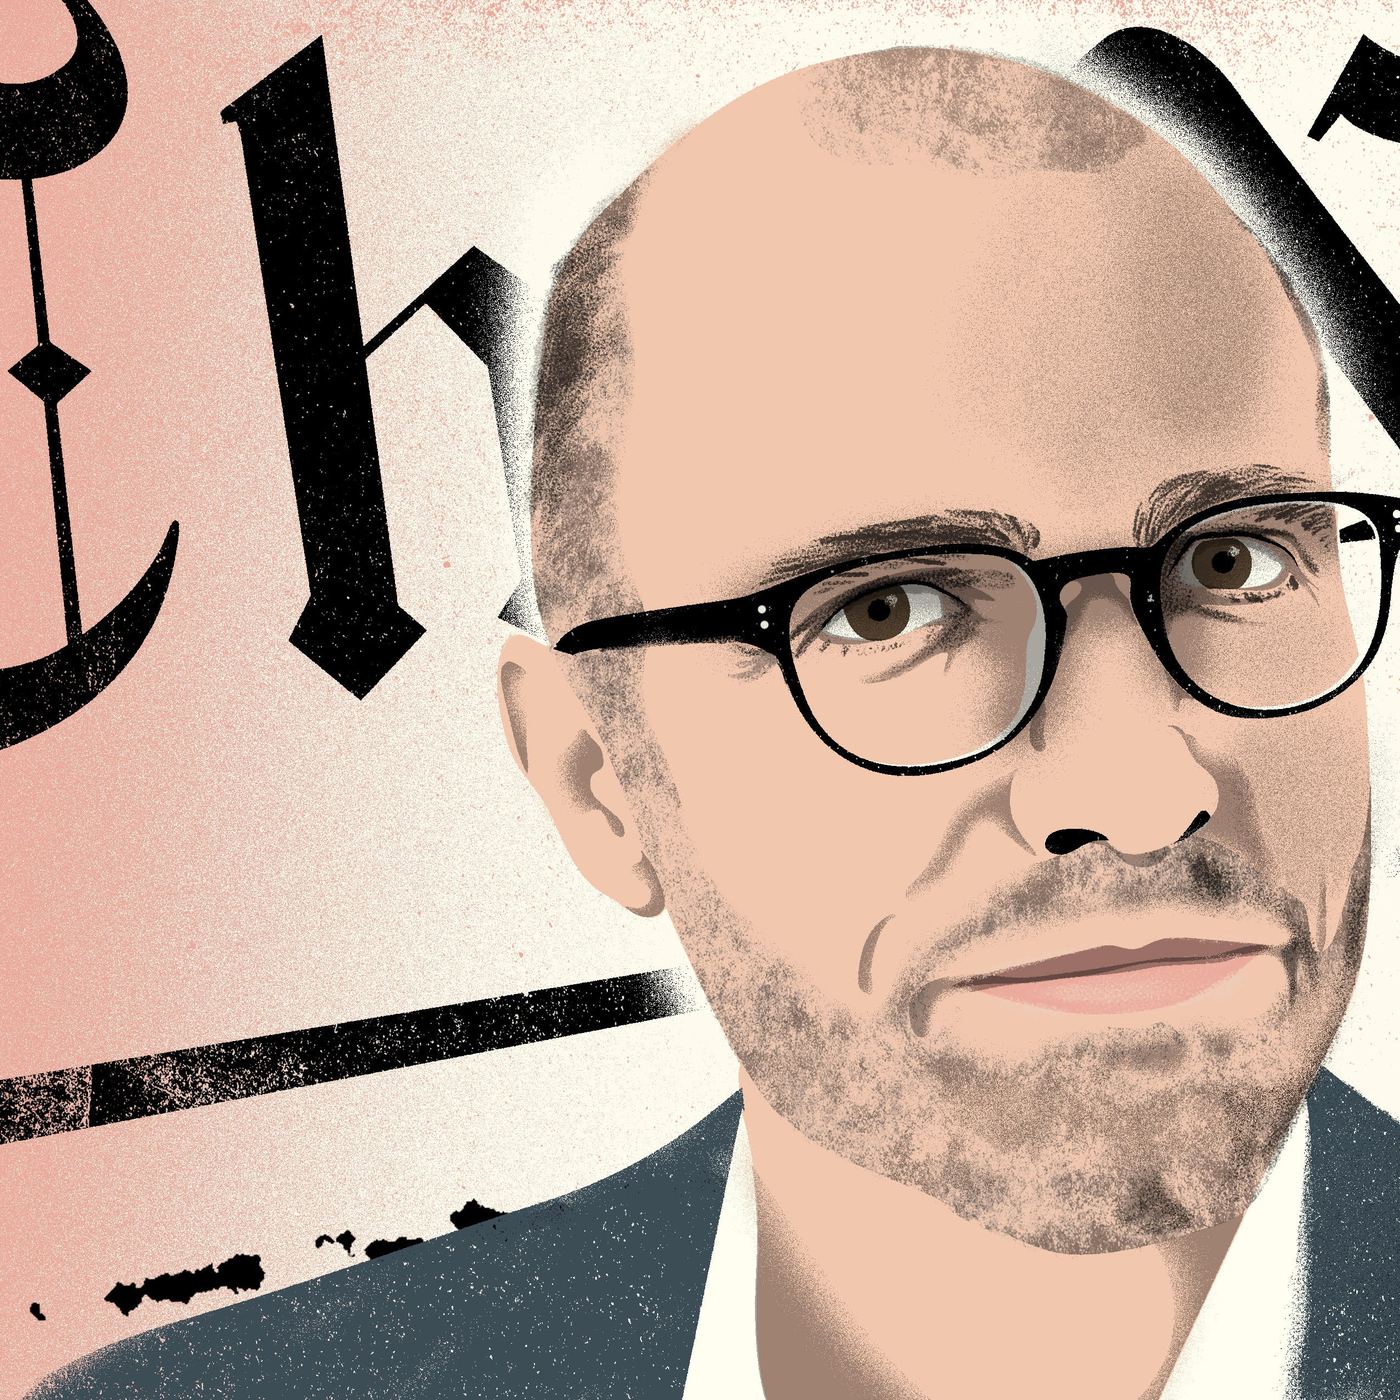 A. G. Sulzberger on Bias and Objectivity at The New York Times